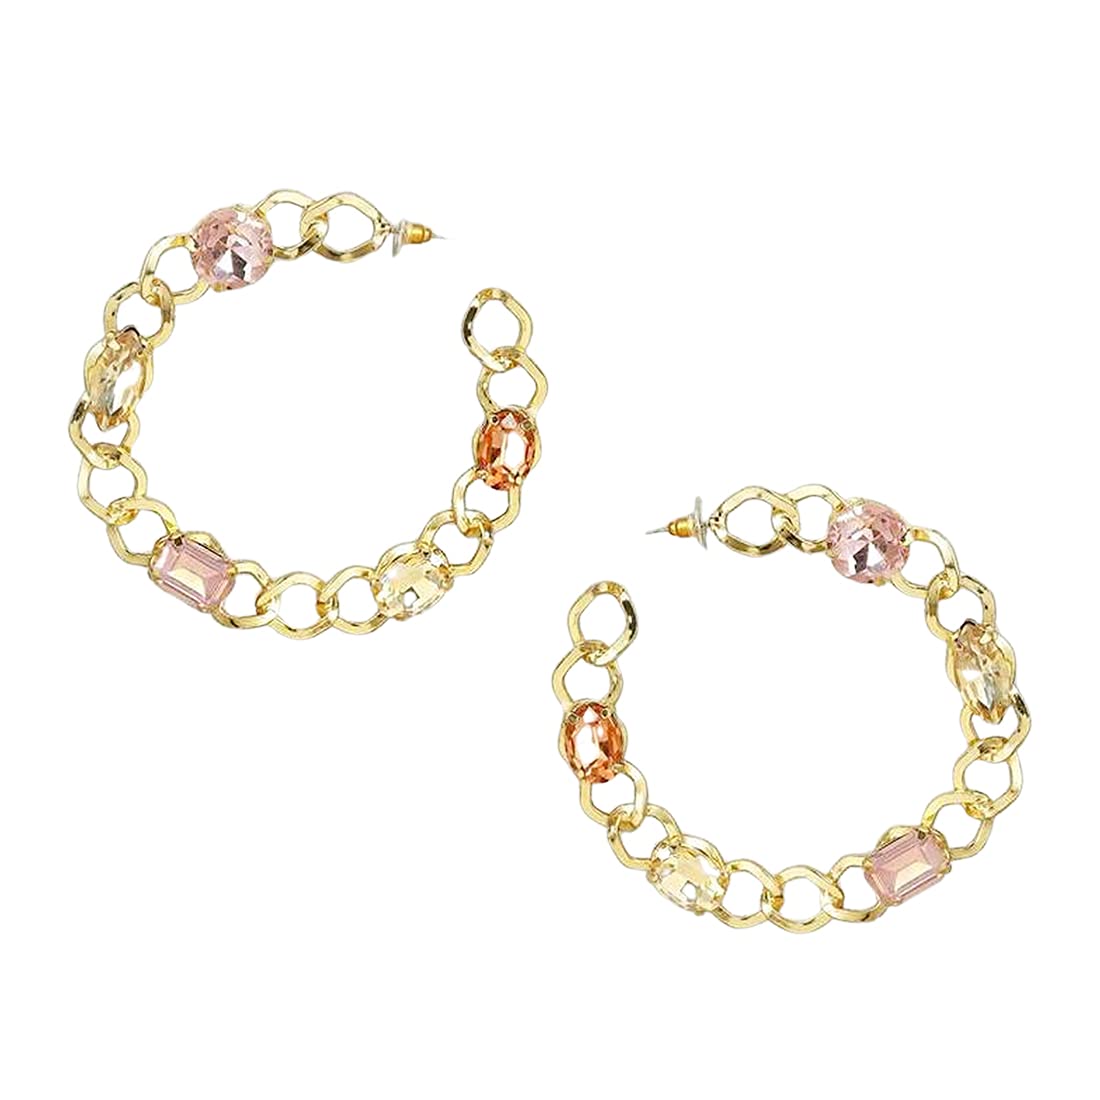 Yellow Chimes Earrings for Women and Girls Fashion Golden Hoops | Gold Plated Multicolor Crystal Studded Big Circle Hoop Earrings | Birthday Gift for girls and women Anniversary Gift for Wife